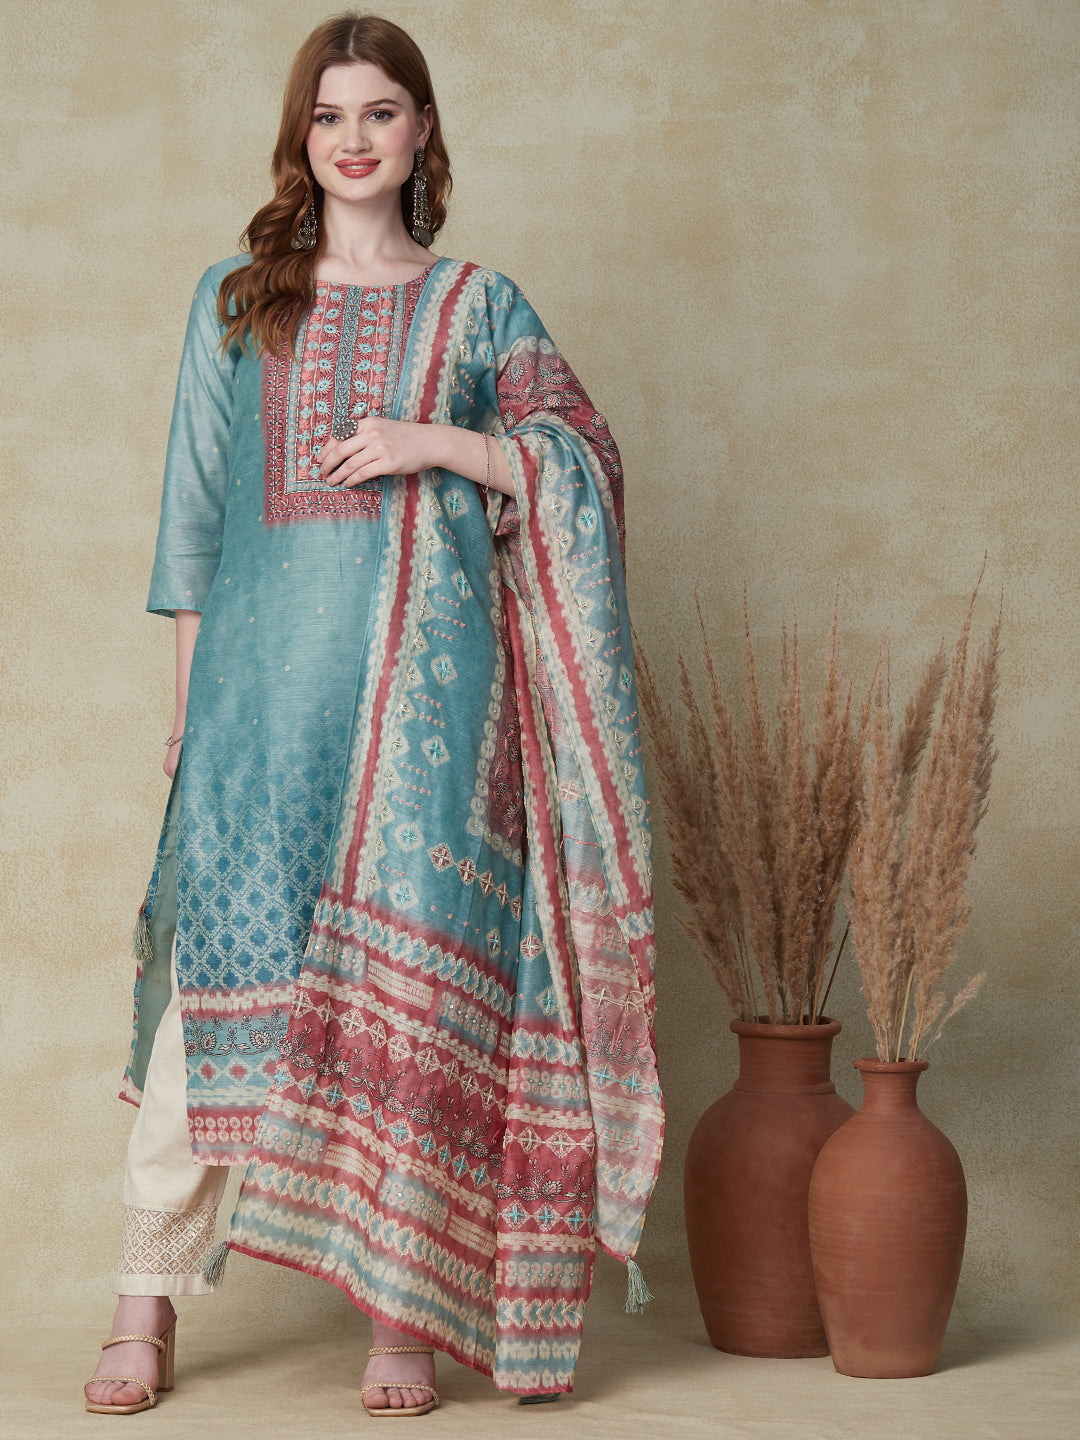 Multi Printed Resham & Sequins Embroidered Kurta with Floral Dupatta - Pastel Green